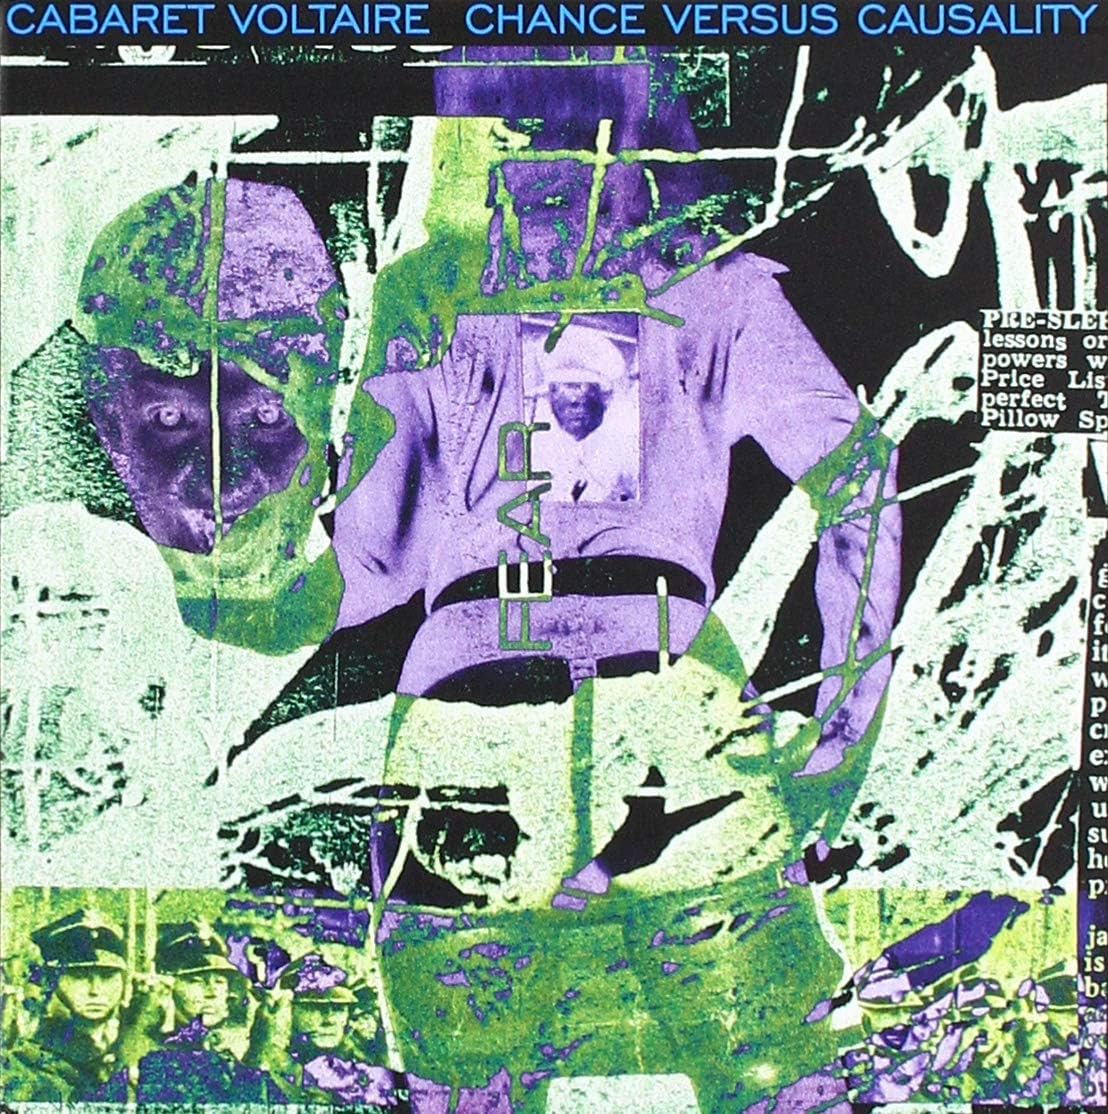 Chance Versus Causality | Cabaret Voltaire